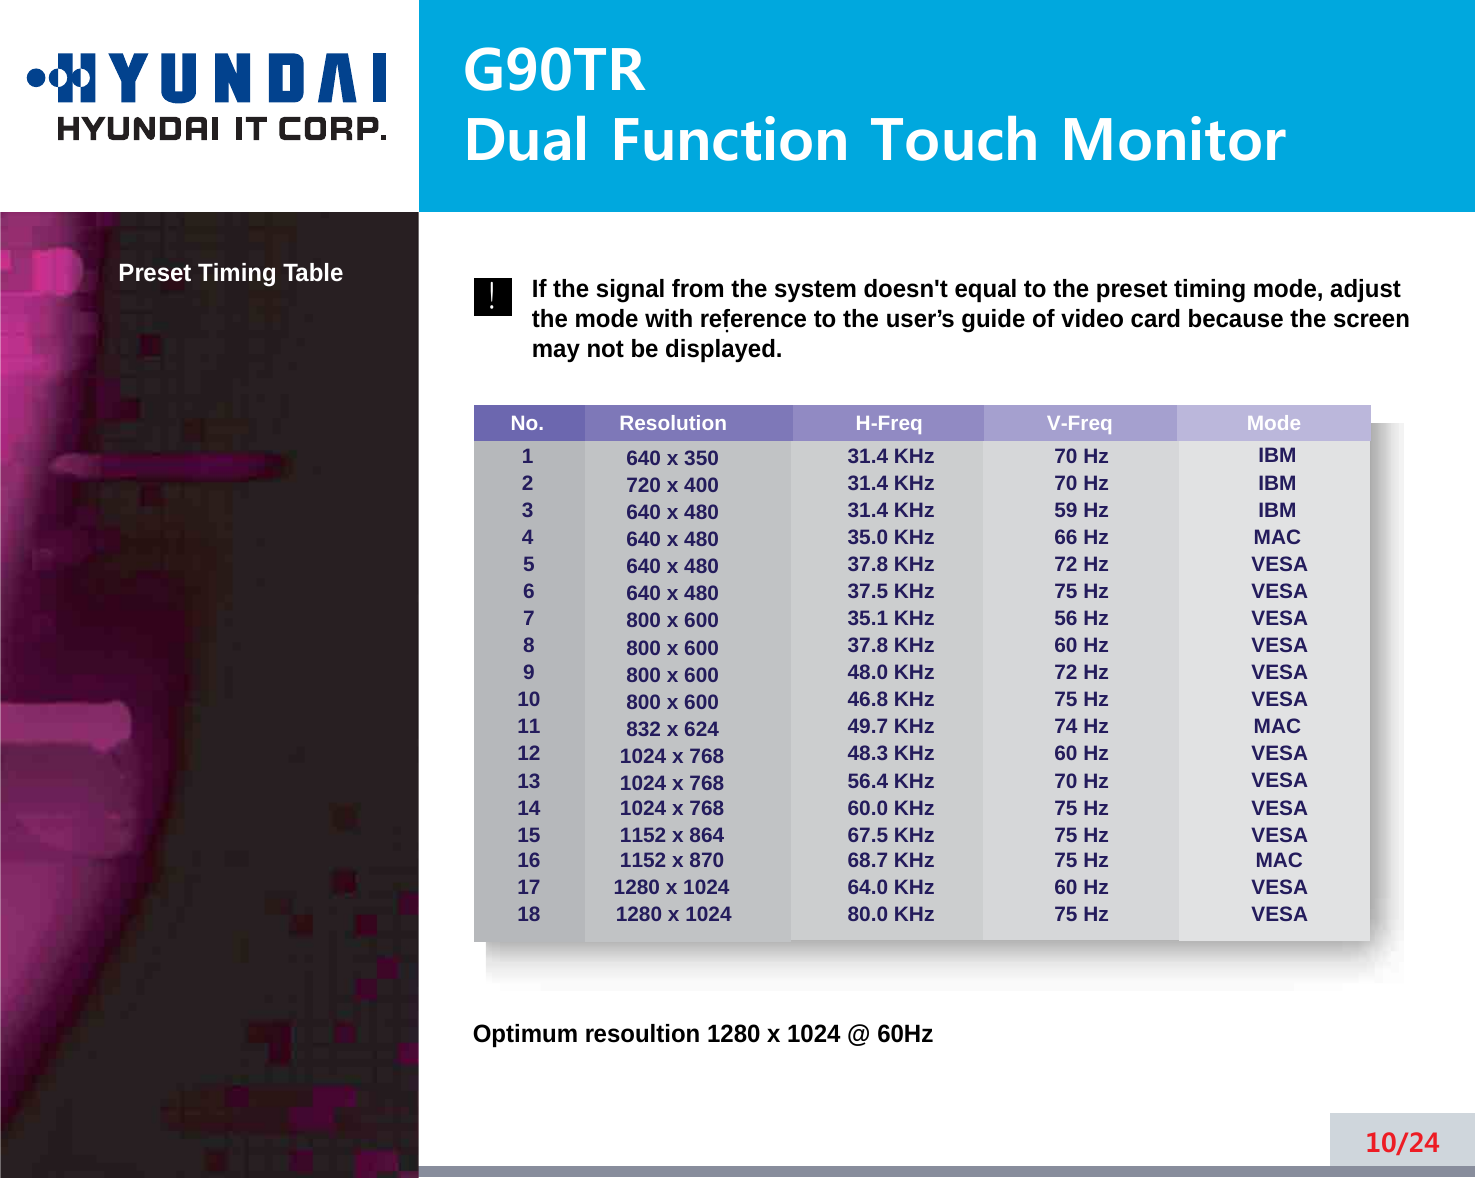 G90TRDual Function Touch Monitor10/24Preset Timing Table.If the signal from the system doesn&apos;t equal to the preset timing mode, adjustthe mode with reference to the user’s guide of video card because the screenmay not be displayed.Optimum resoultion 1280 x 1024 @ 60Hz !No.1234567891011121314Resolution640 x 350720 x 400640 x 480640 x 480640 x 480640 x 480800 x 600800 x 600800 x 600800 x 600832 x 6241024 x 7681024 x 7681024 x 768H-Freq31.4 KHz31.4 KHz31.4 KHz35.0 KHz37.8 KHz37.5 KHz35.1 KHz37.8 KHz48.0 KHz46.8 KHz49.7 KHz48.3 KHz56.4 KHz60.0 KHzV-Freq70 Hz70 Hz59 Hz66 Hz72 Hz75 Hz56 Hz60 Hz72 Hz75 Hz74 Hz60 Hz70 Hz75 HzModeIBMIBMIBMMACVESAVESAVESAVESAVESAVESAMACVESAVESAVESA15 1152 x 864 67.5 KHz 75 Hz VESA16 1152 x 870 68.7 KHz 75 Hz MAC17 1280 x 1024 64.0 KHz 60 Hz VESA18 1280 x 1024 80.0 KHz 75 Hz VESA